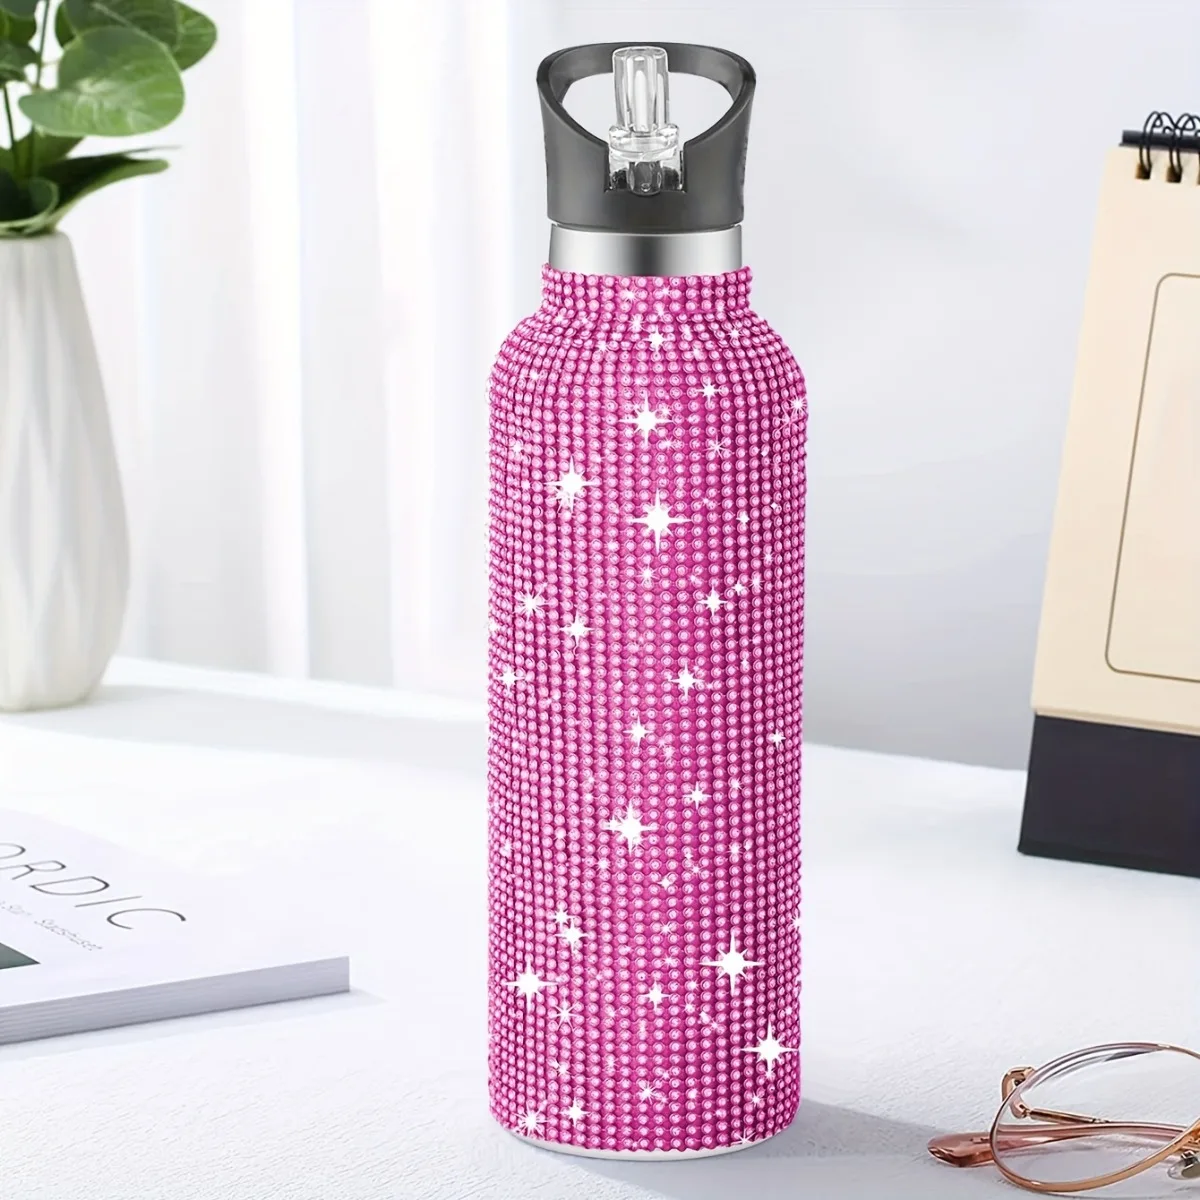 

Studded Vacuum Cup With Straw Stainless Steel Insulated Water Bottles Shiny Rhinestone Decor Thermal Cups For Hot/Cold Beverage